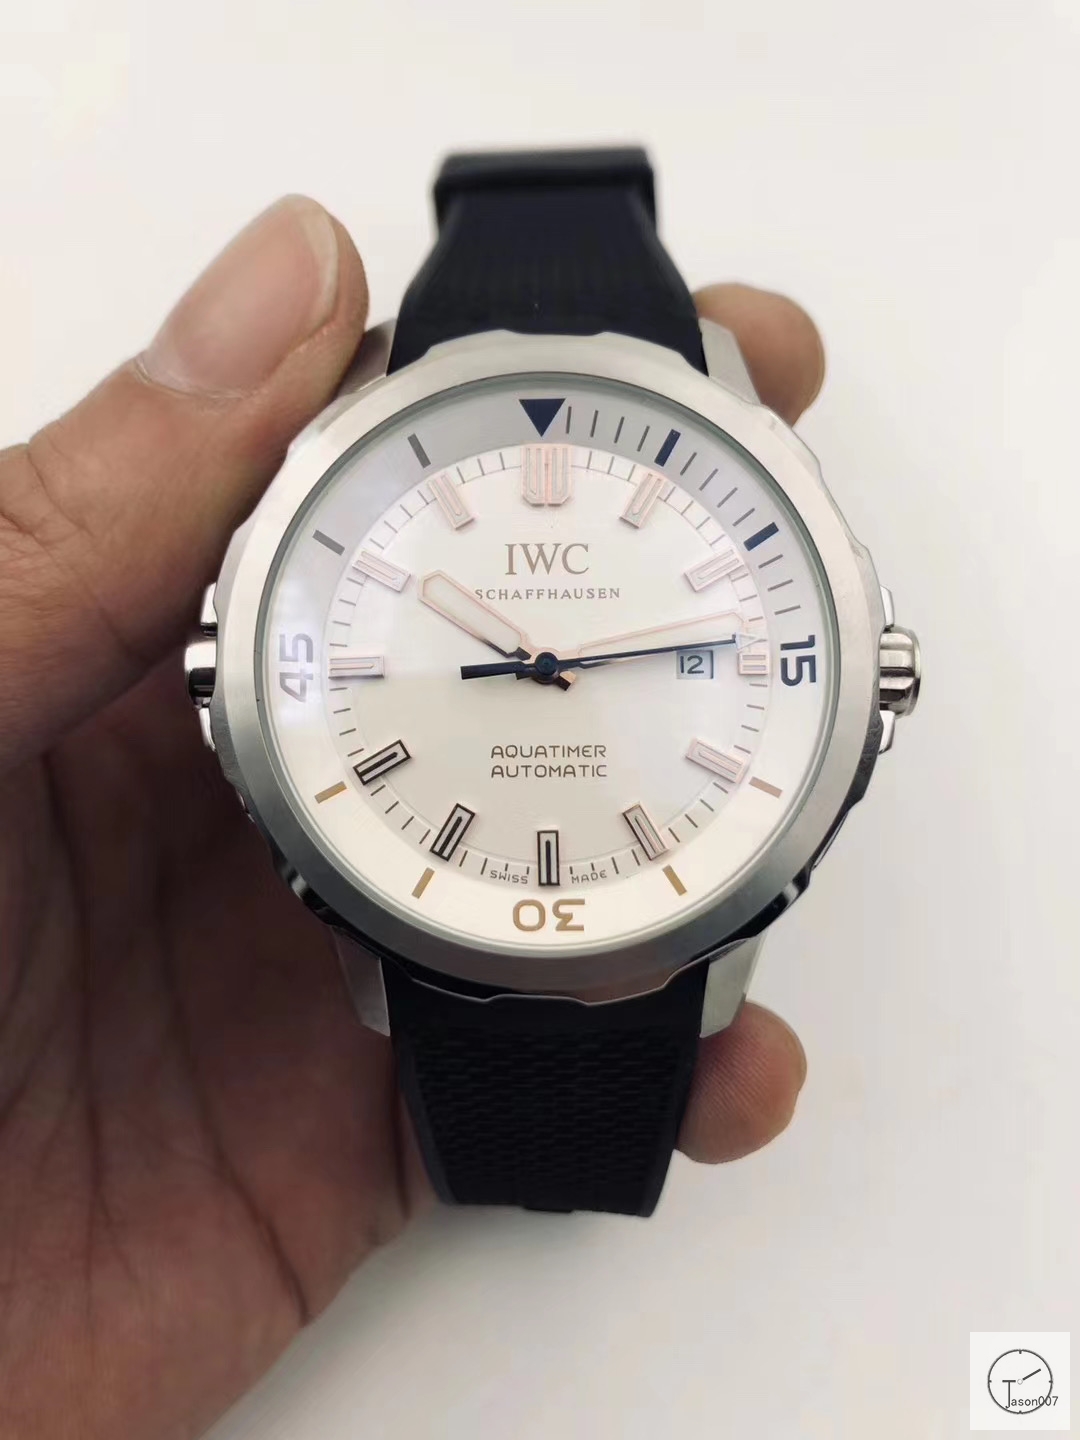 IWC AQUATIMER AUTOMATIC Mechical IW329001 42MM BLACK DIAL PVD Case Stainless Steel Strap Mens Wristwatches ICW22090560